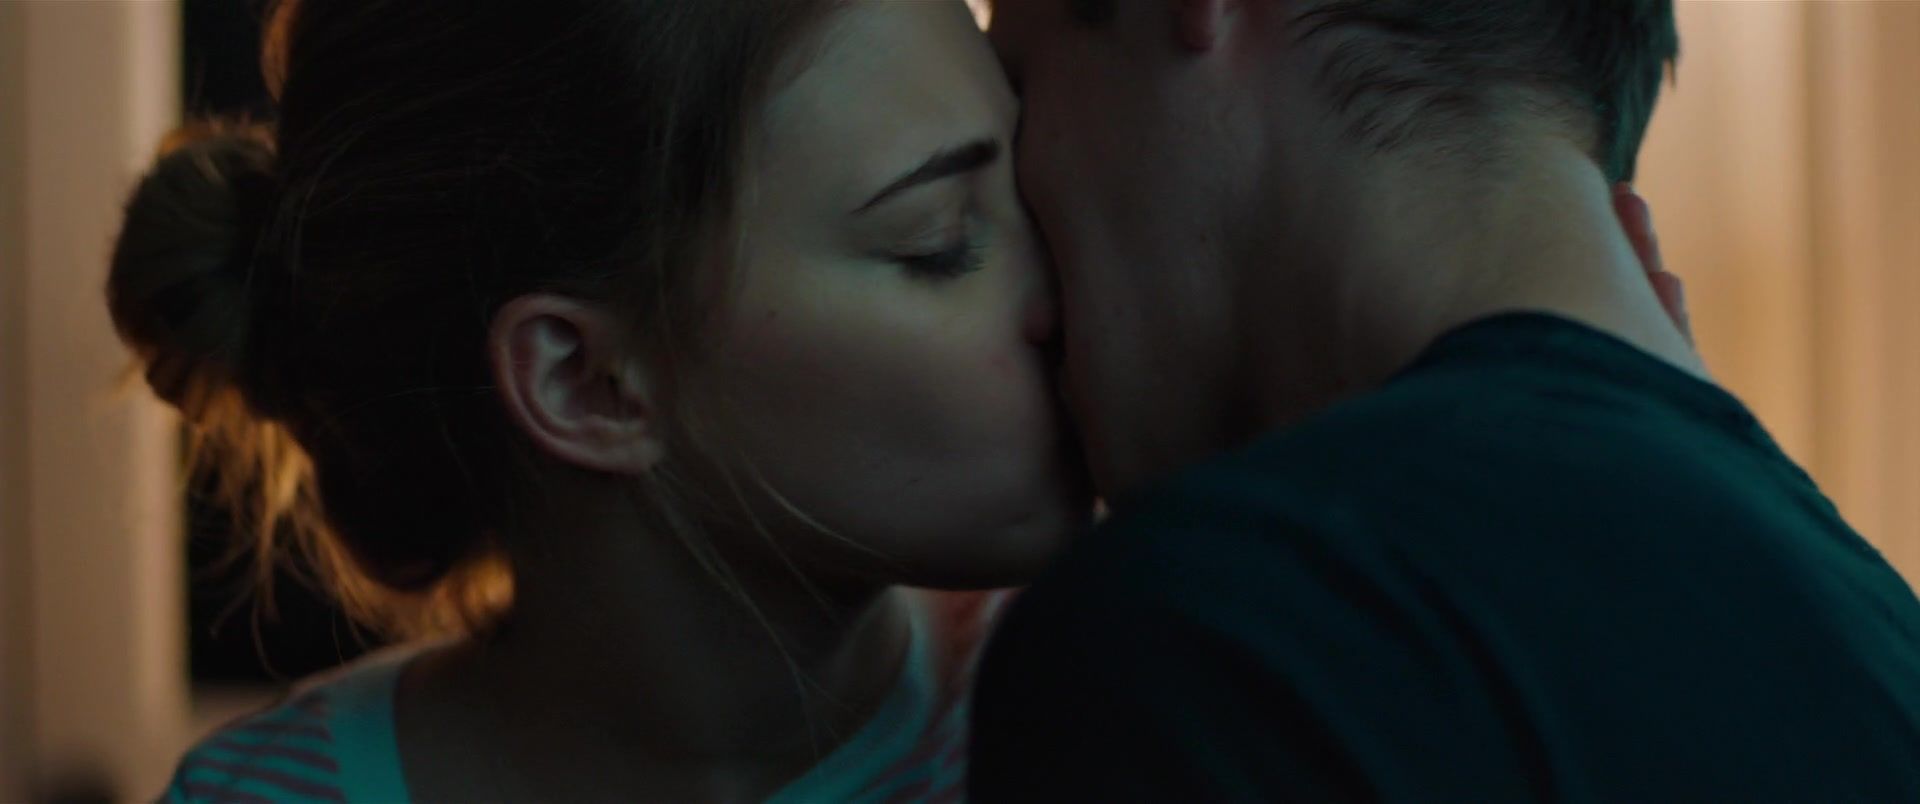 Gay Bus Josephine Langford nude - After (2019) HotMovs - 2